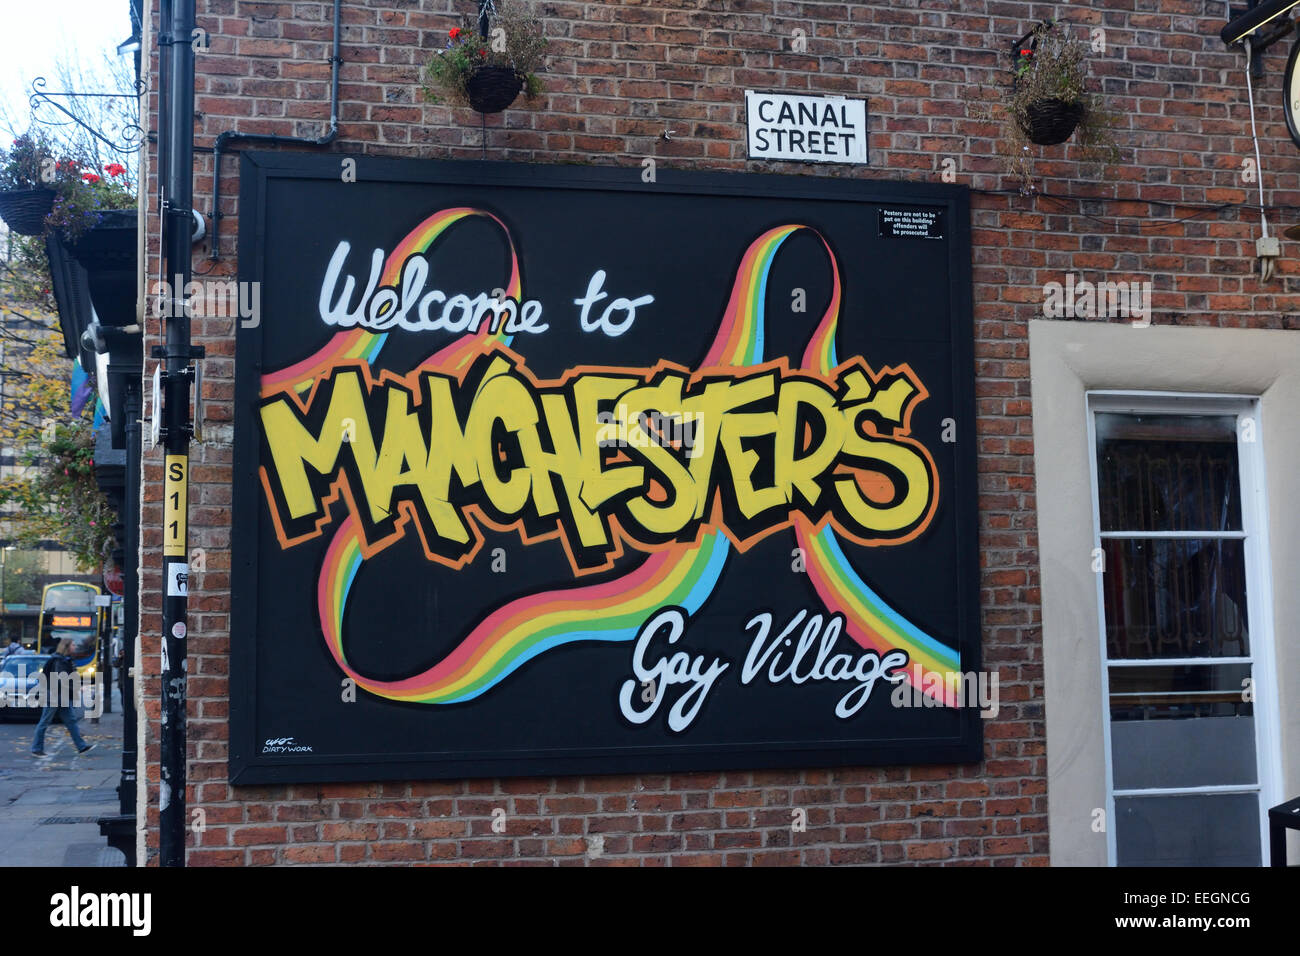 Welcome to Manchester's gay village sign in Canal Street, Manchester. Stock Photo